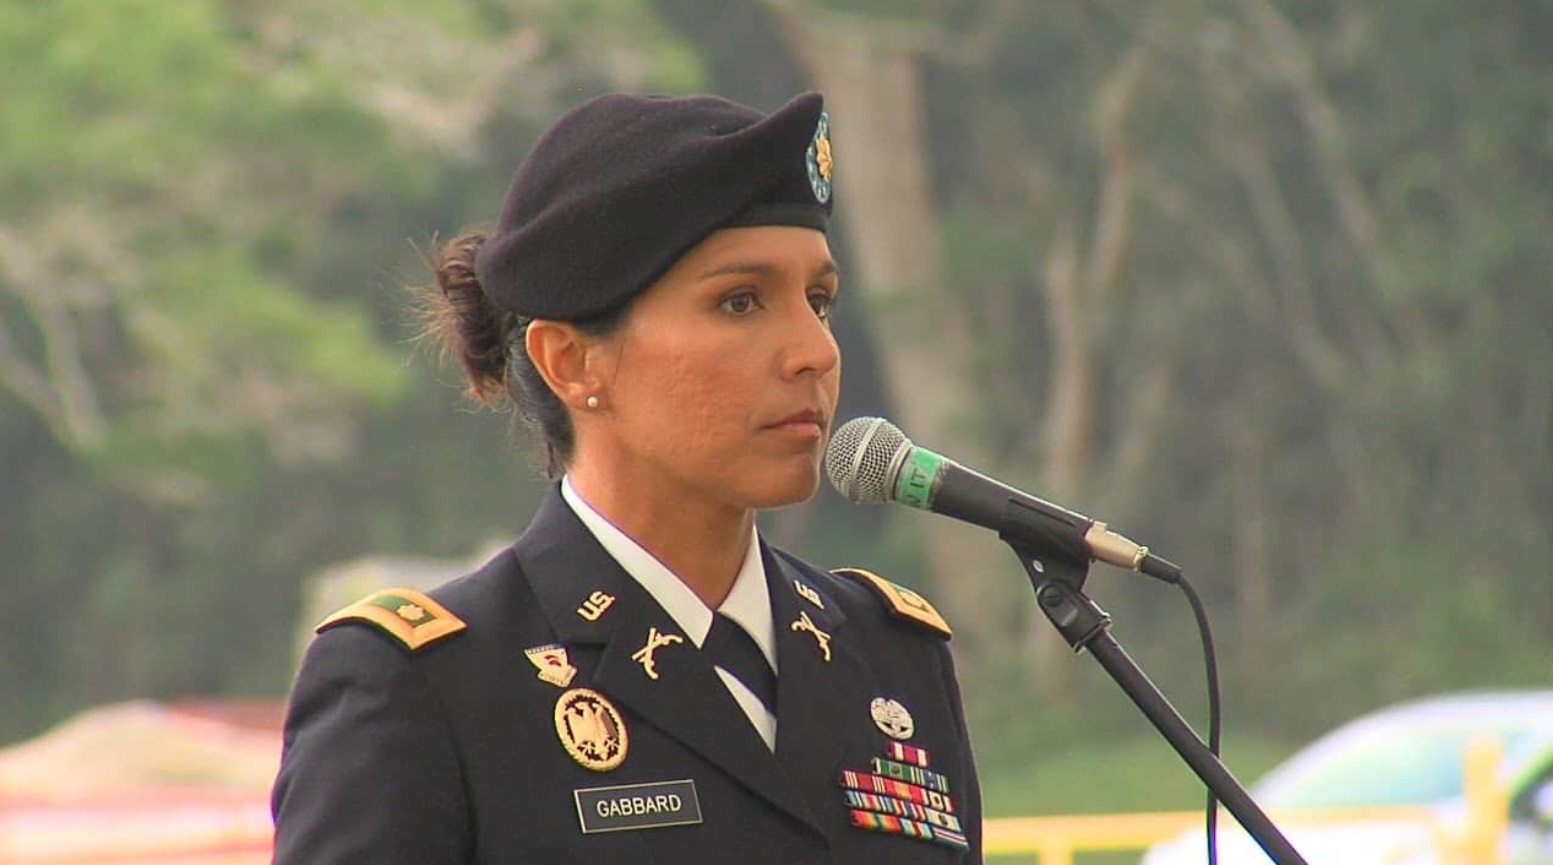 PHOTO Tulsi Gabbard's Rough And Ugly Facial Skin While Wearing Military Uniform